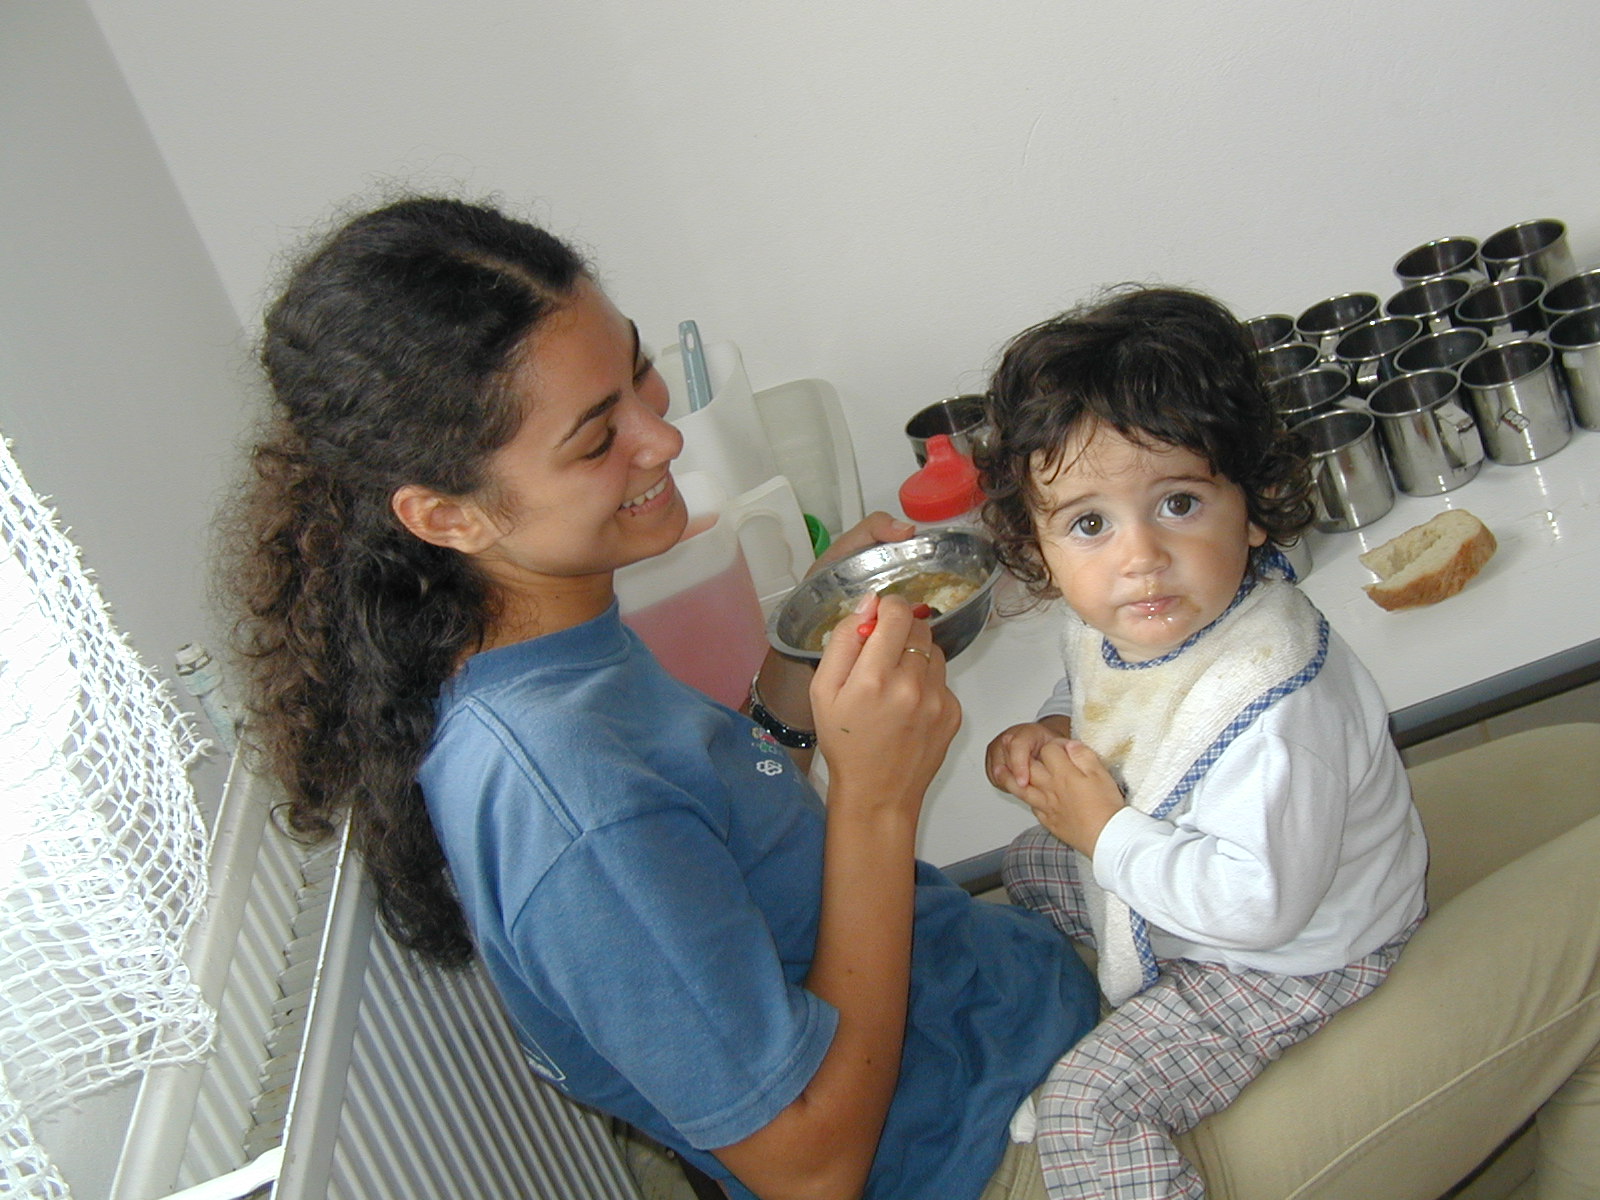 Caregiver and Child at the Orphanage.